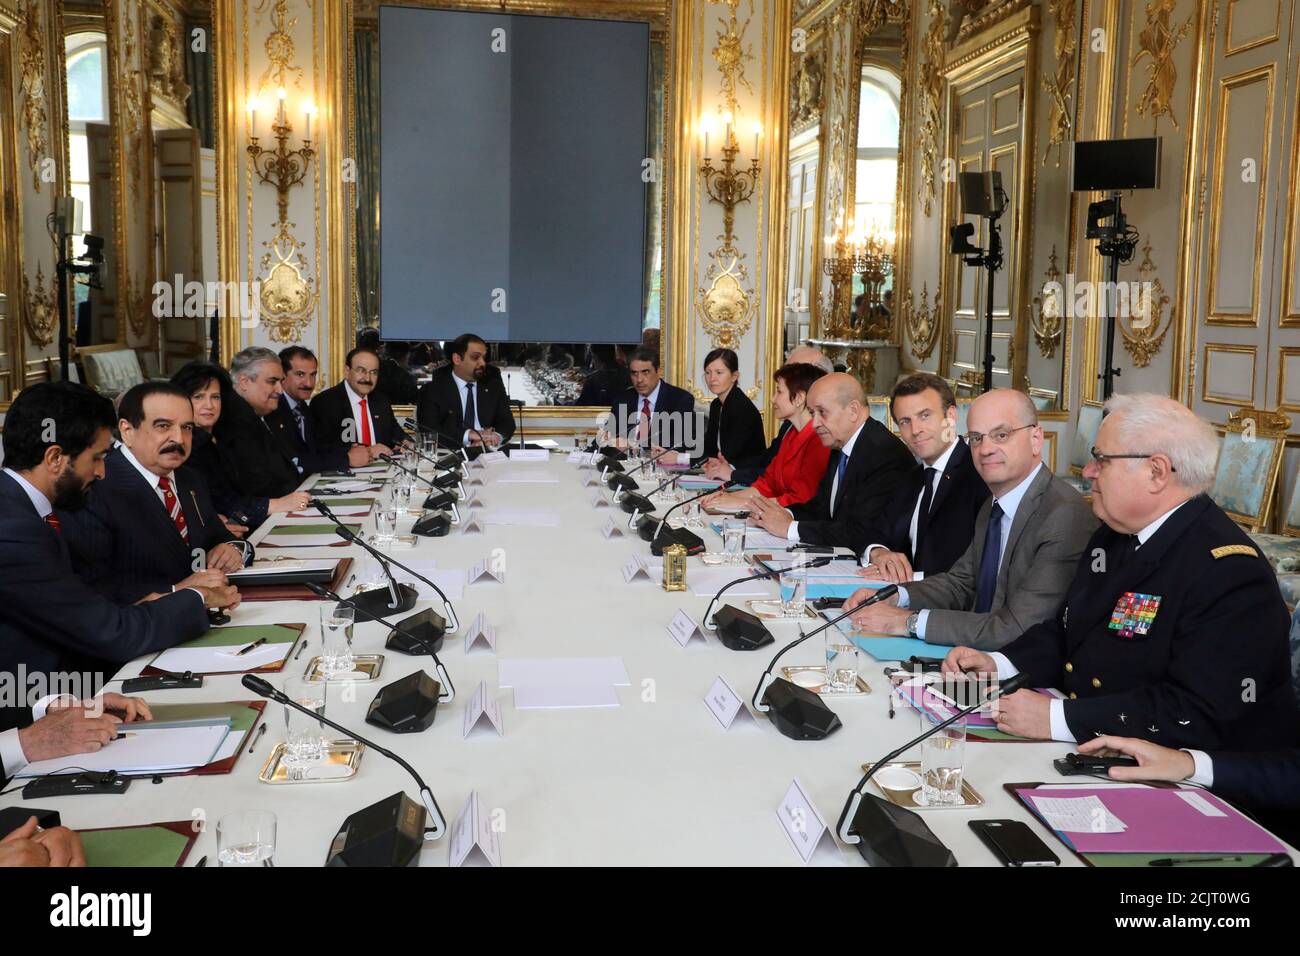 French President Emmanuel Macron (3d R), Education and Youth Affairs  Minister Jean-Michel Blanquer (2nd R) and Foreign Affairs Minister Jean-Yves  Le Drian (4th R) attend a meeting with King of Bahrain Hamad